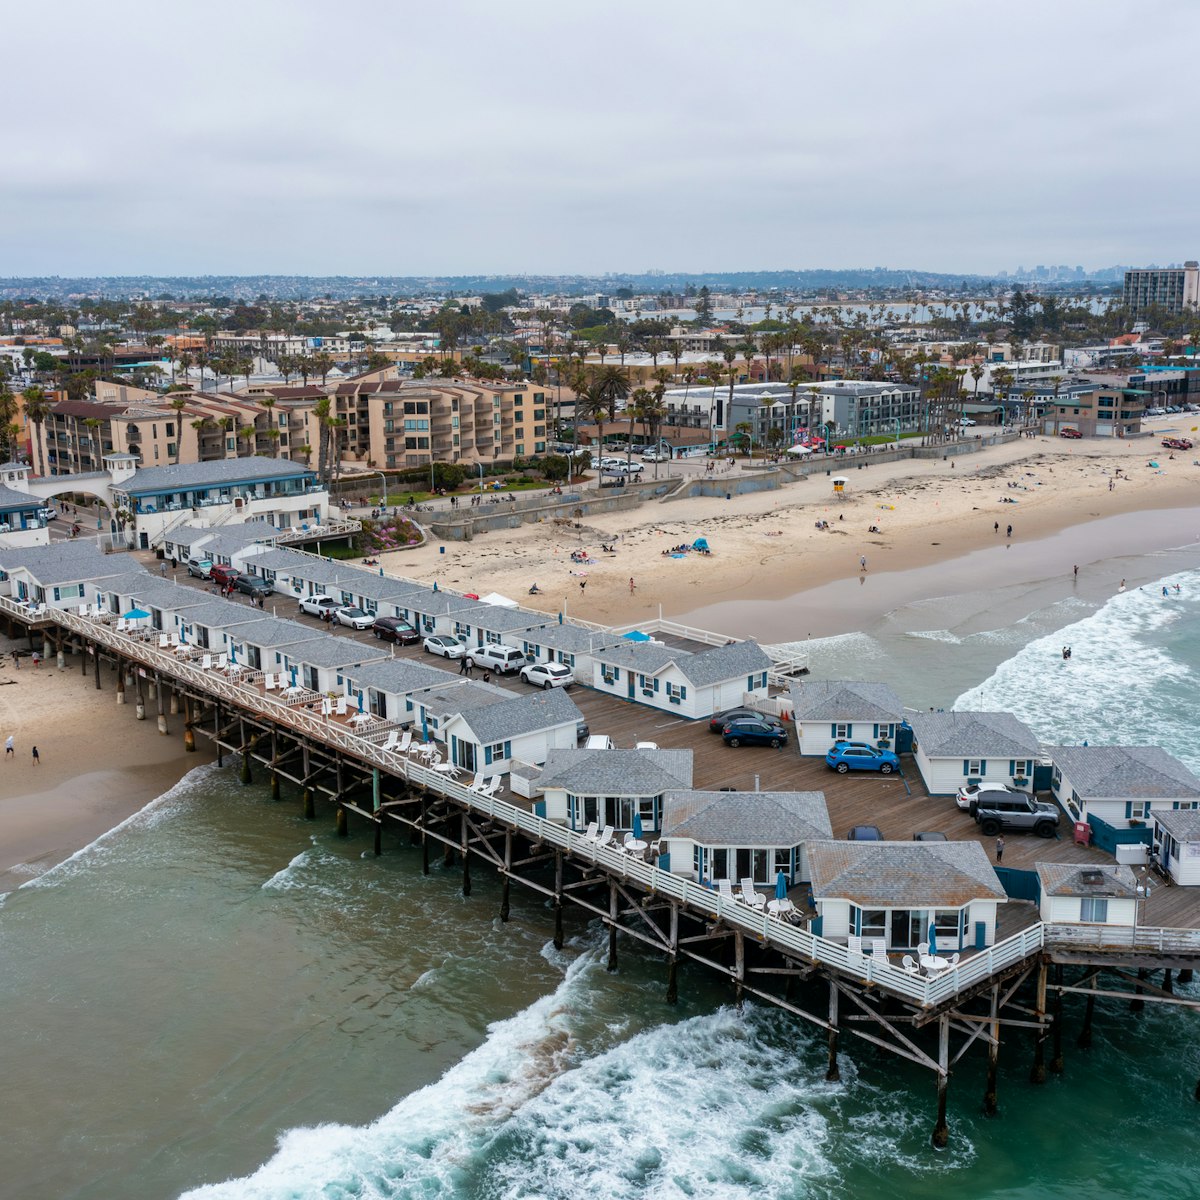 Aerial View of the Crystal Pier in Pacific Beach on an Overcast Day San Diego California
1497644165